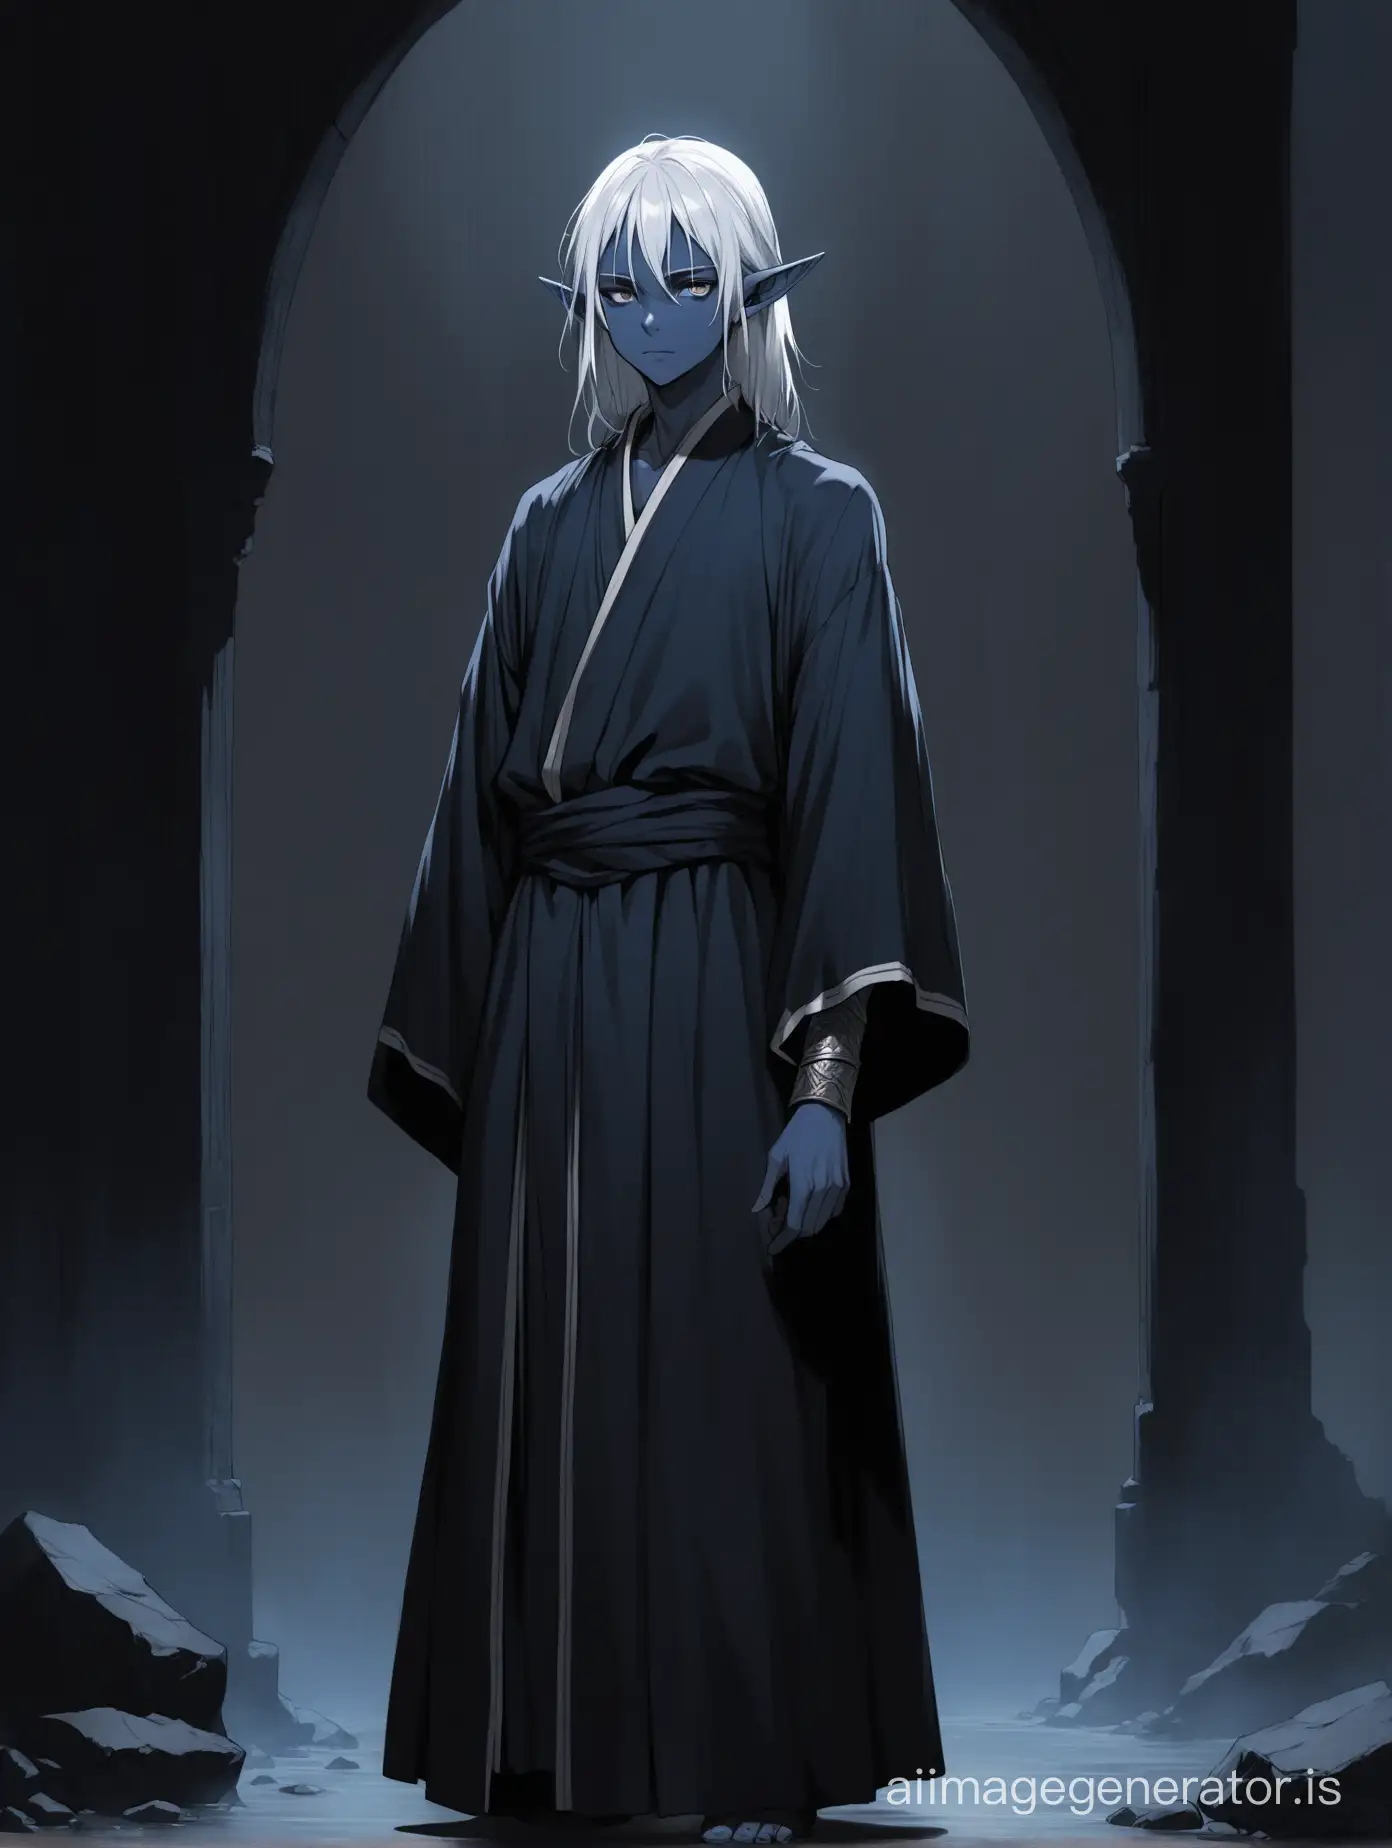 A 16-year-old boy, a dark elf with gray-blue skin, with white hair in a dark robe and a black shirt, stands in the dark